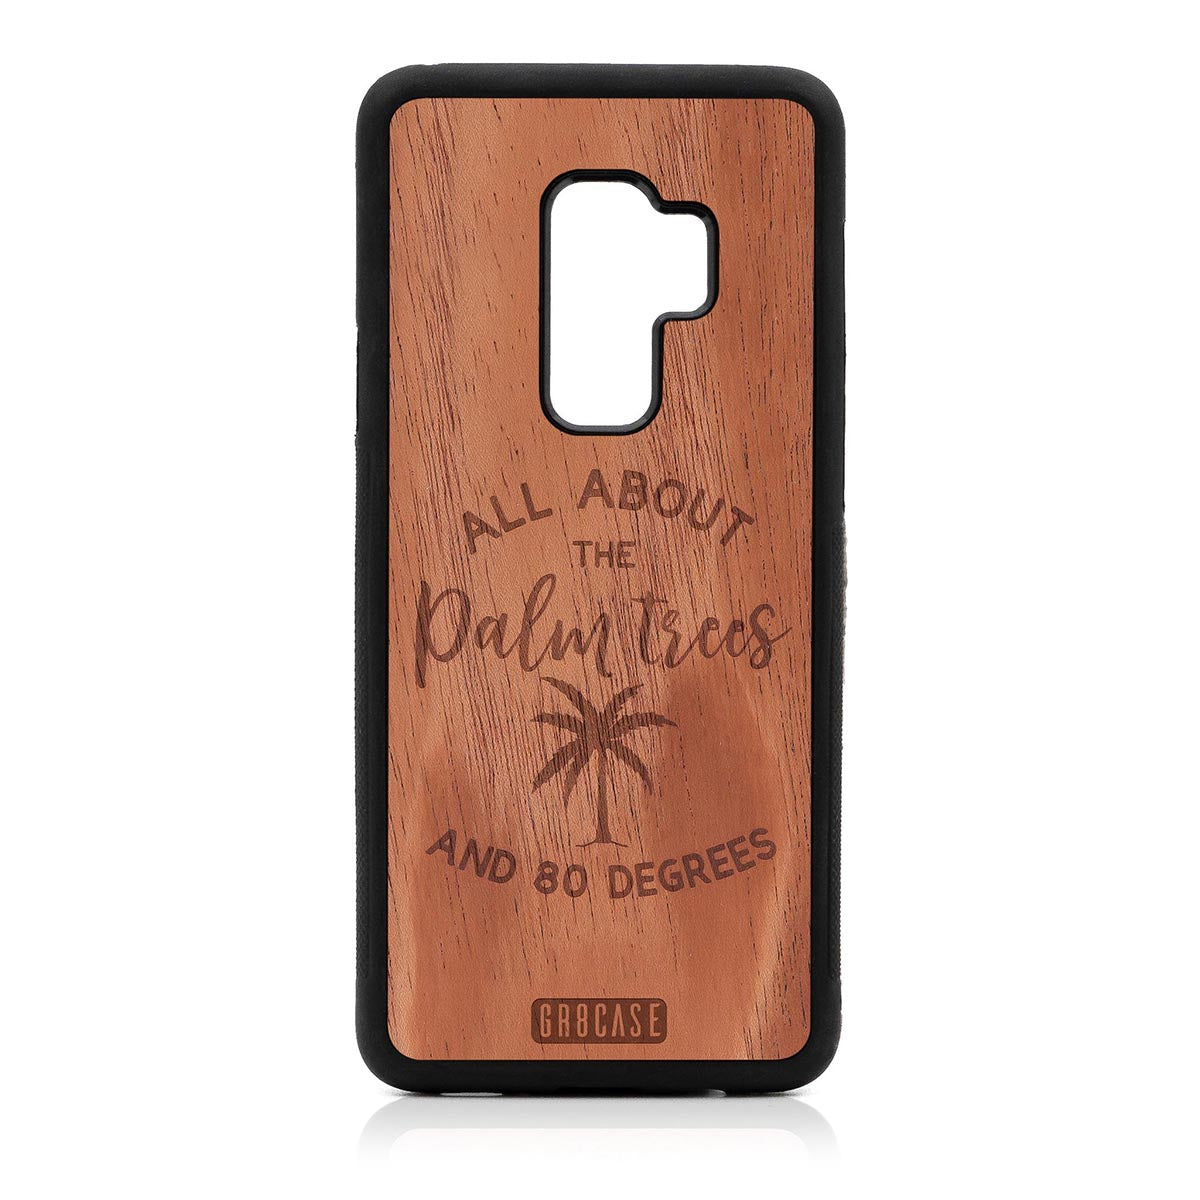 All About The Palm Trees and 80 Degrees Design Wood Case For Samsung Galaxy S9 Plus by GR8CASE